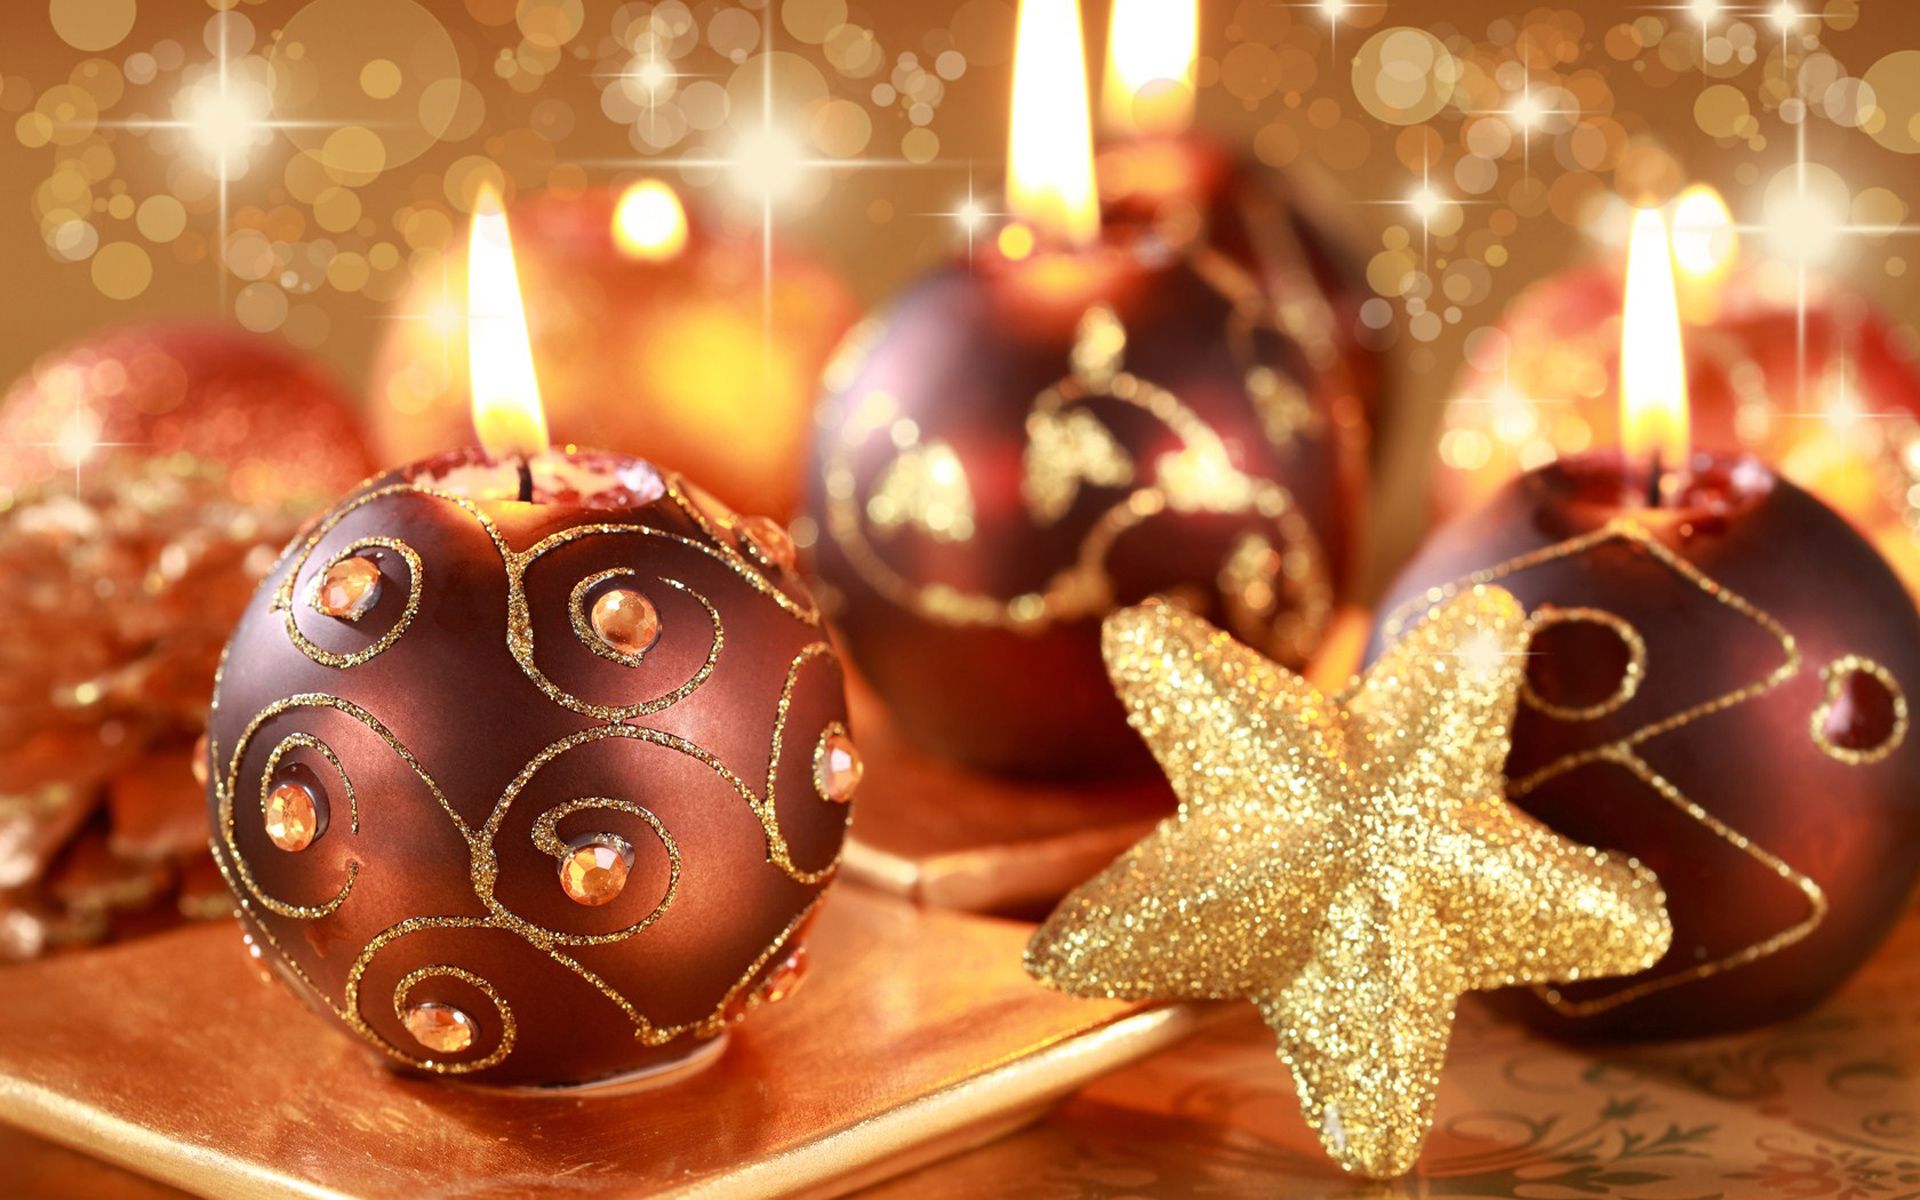 Lovely Christmas Candles wallpaperx1200